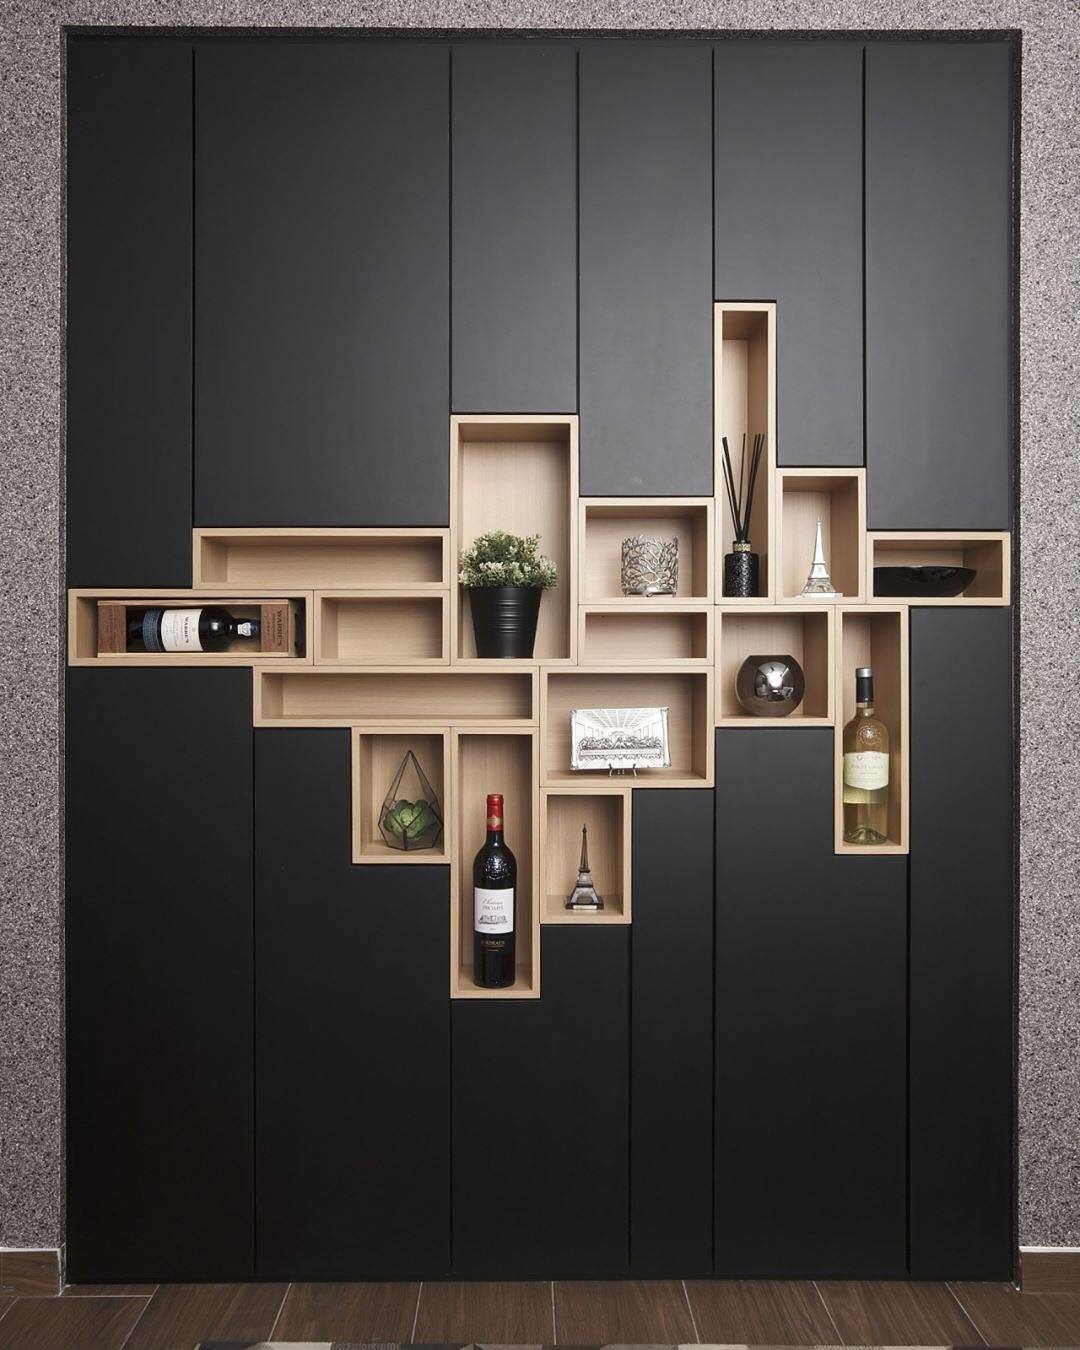 Shelving System By Juz Interior